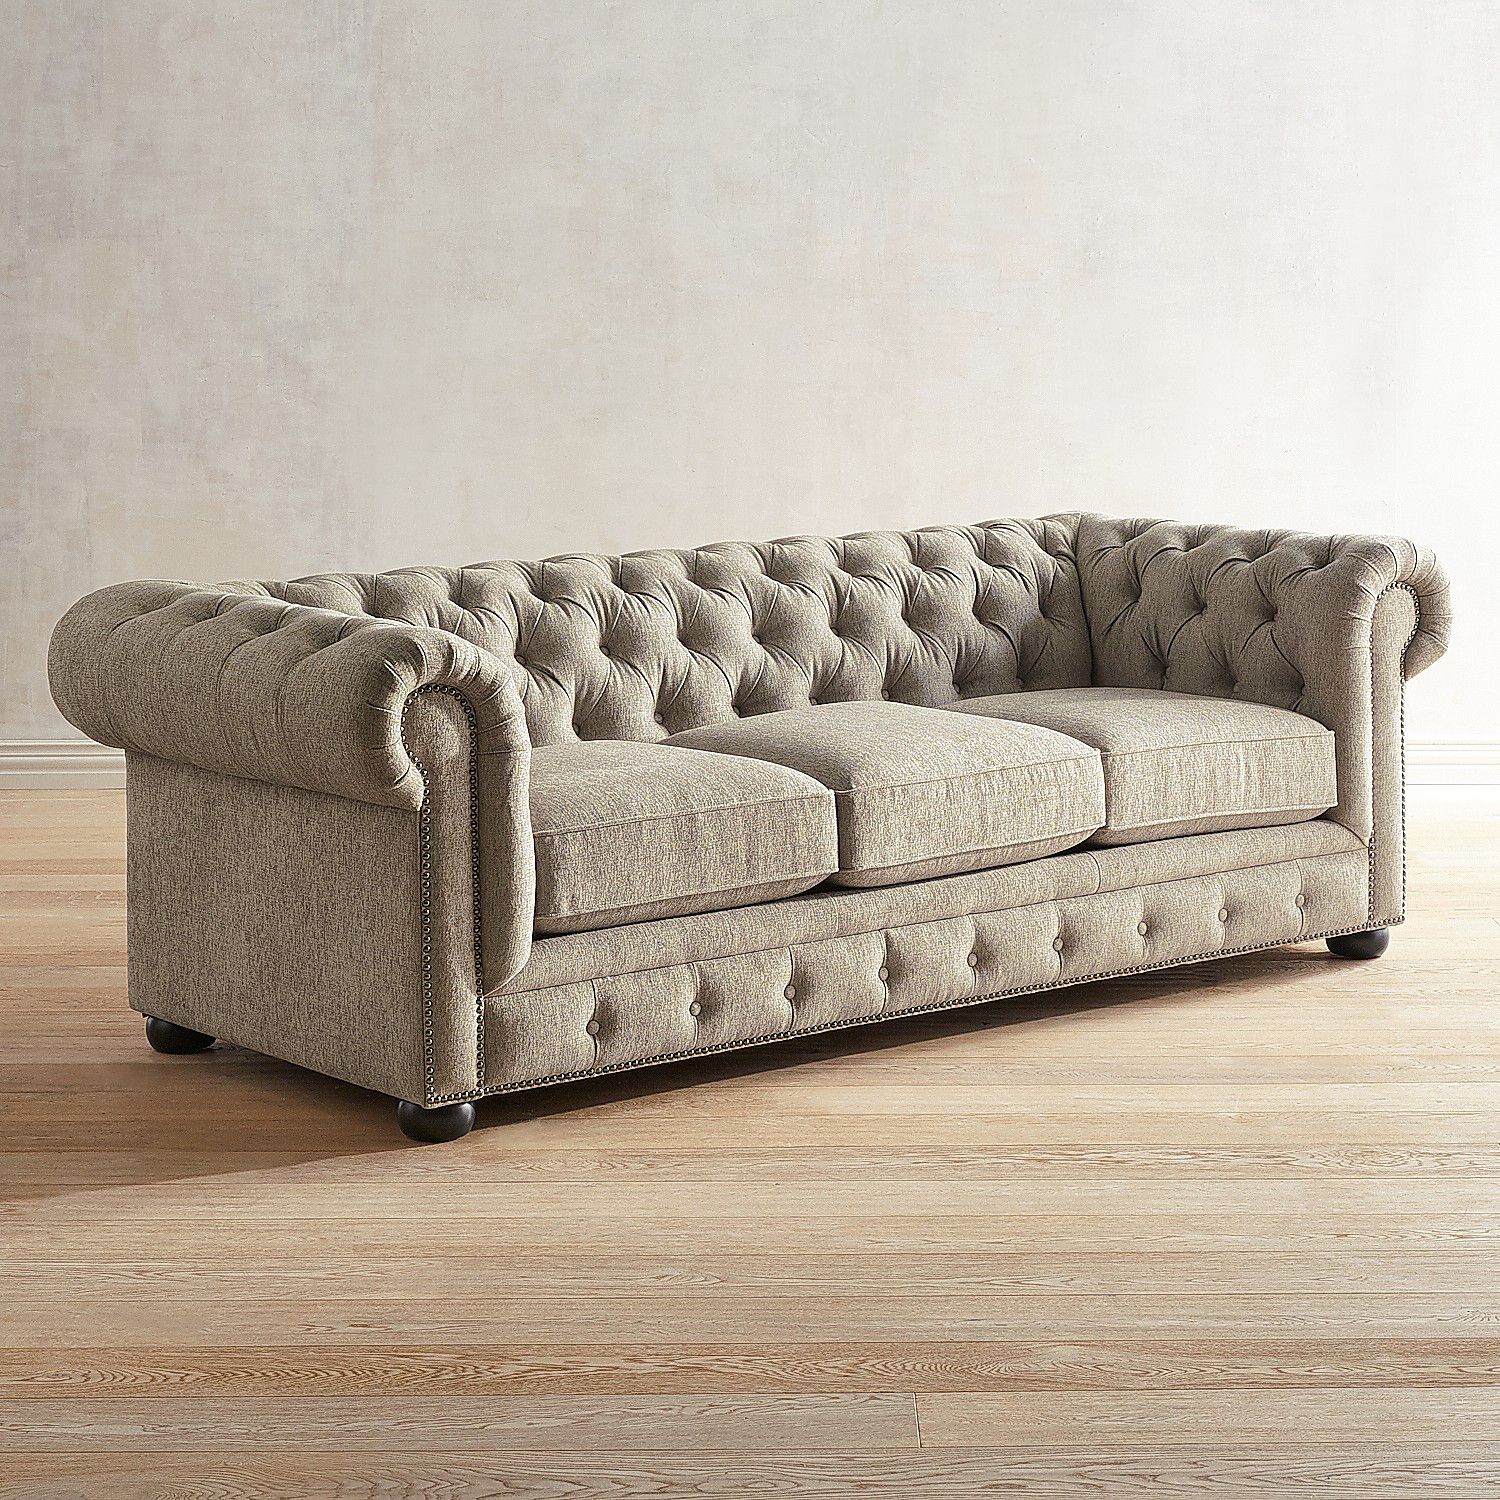 Southerlyn Oatmeal Chesterfield Sofa